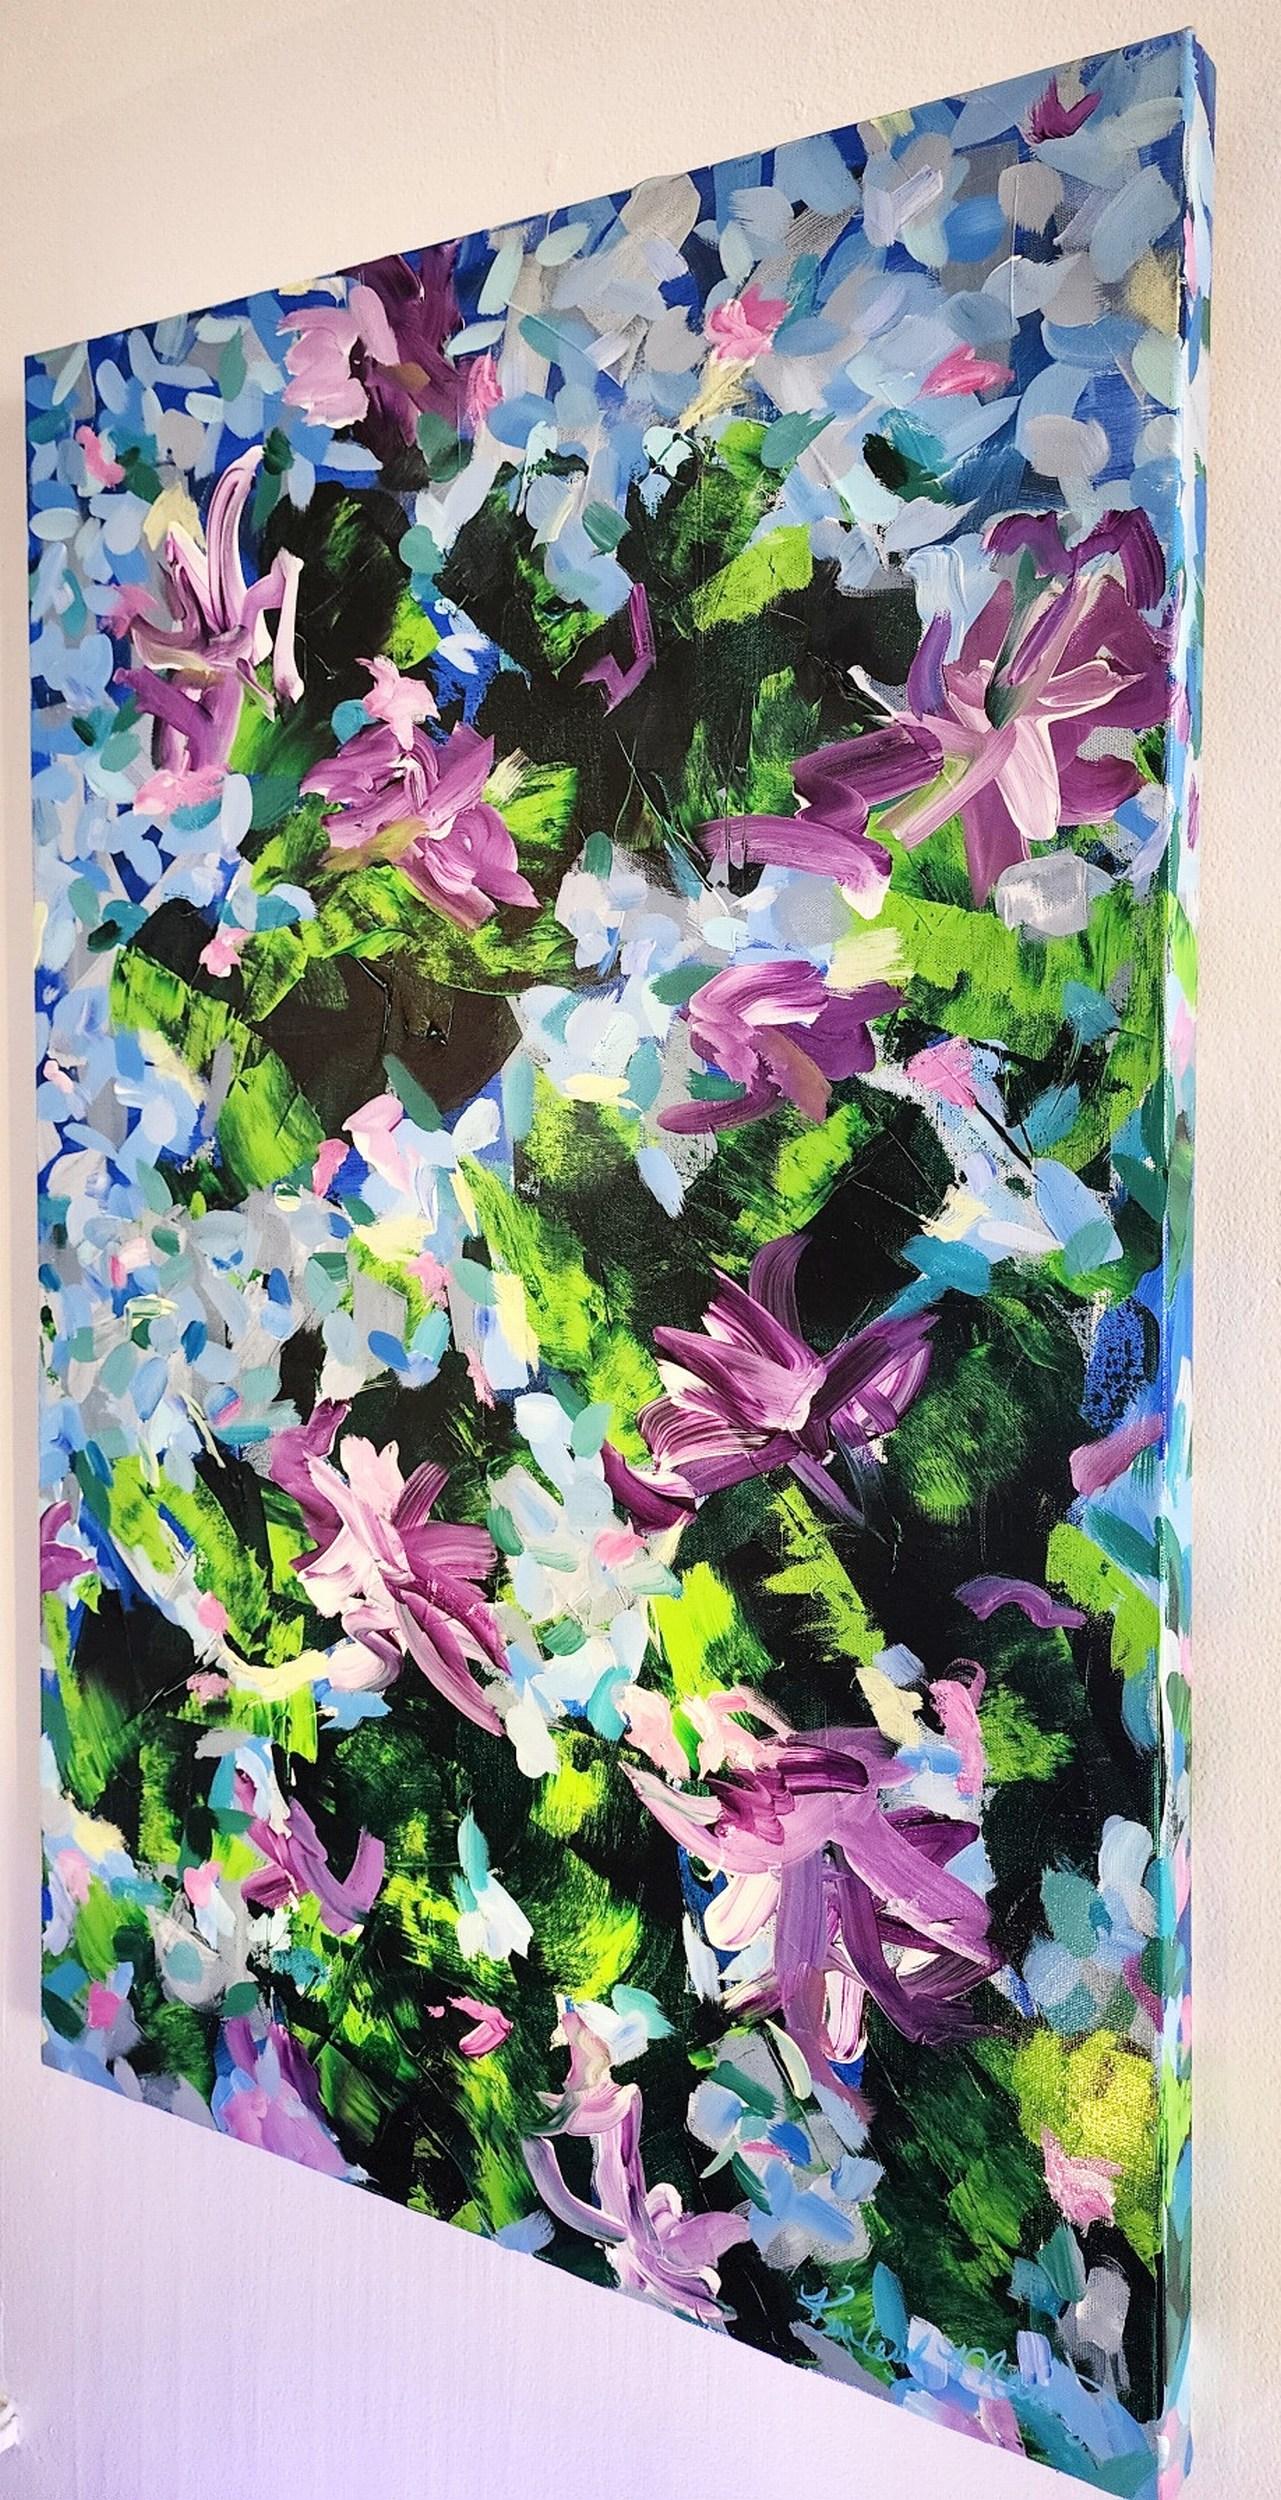 Joy (Abstract, Floral, Blue, Pink, Rose, Purple, Landscape, Garden) - Painting by Kimberly Marney